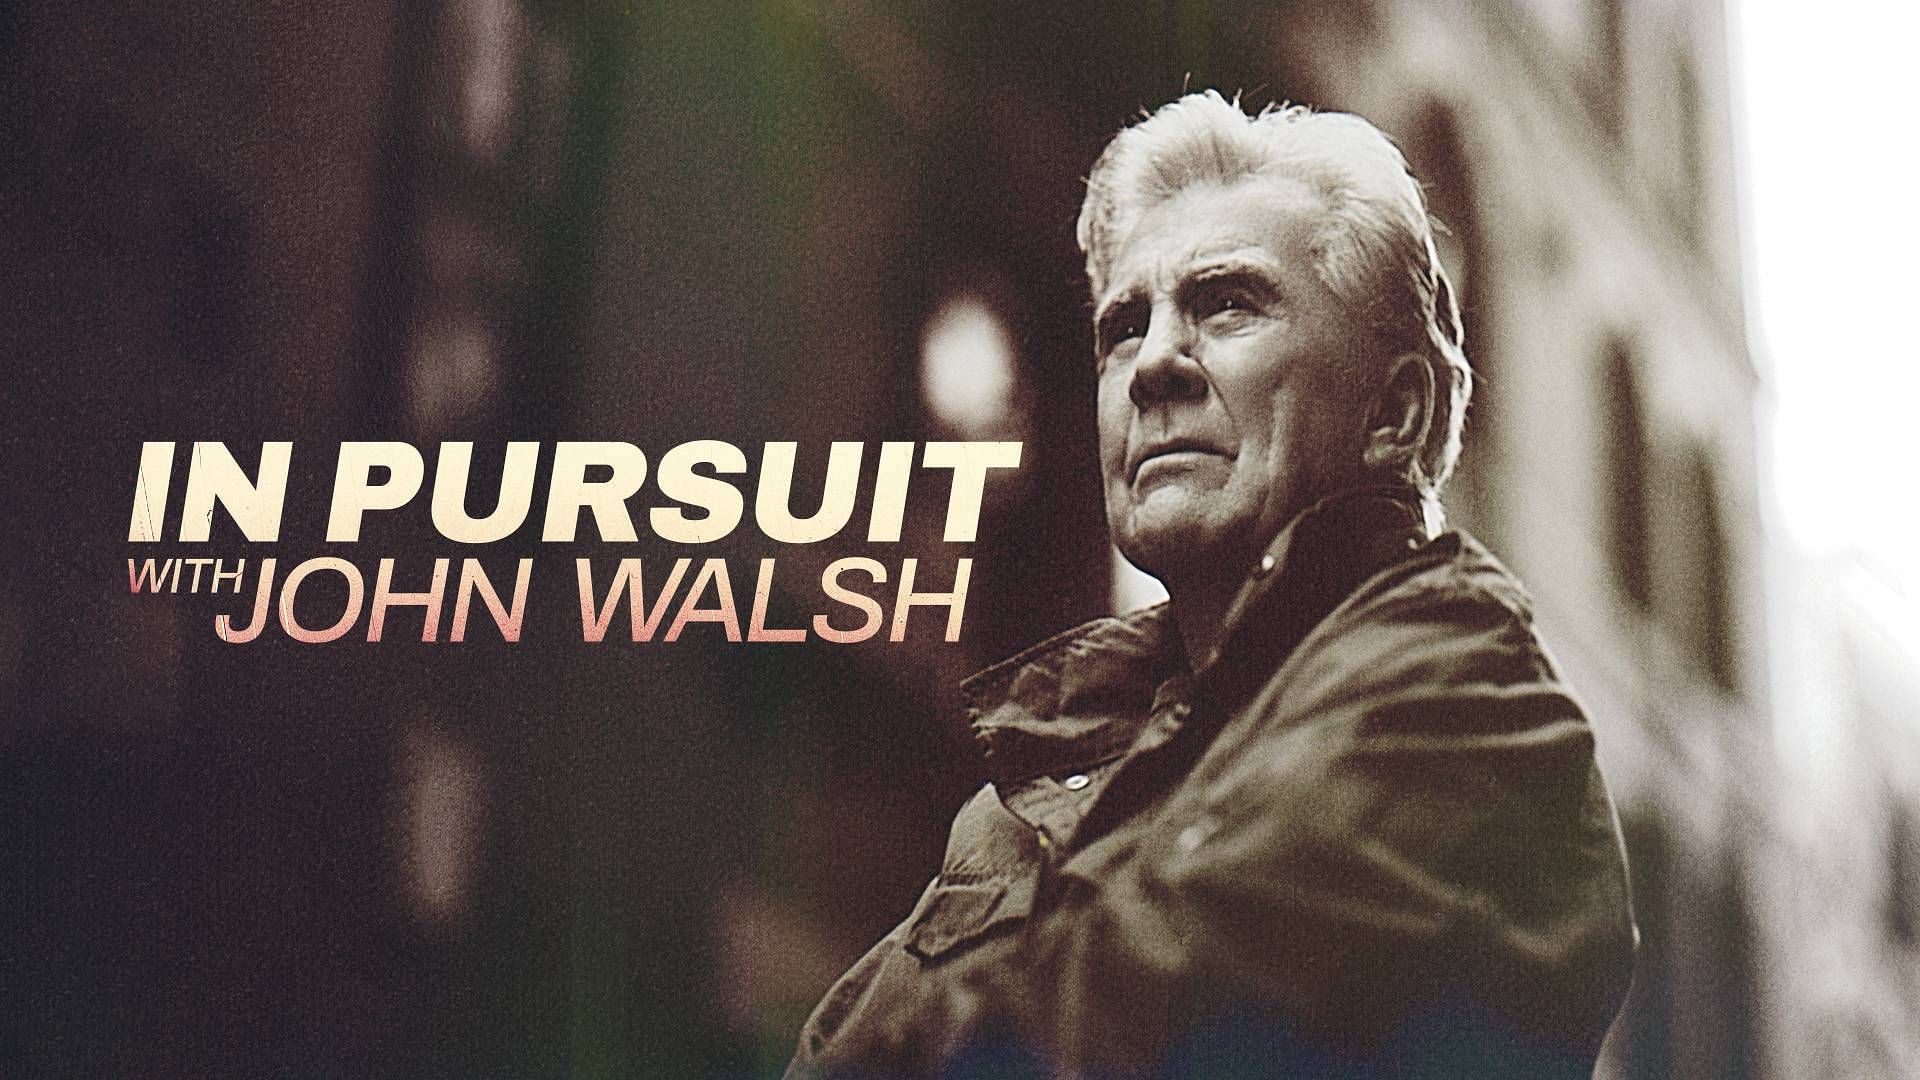 A poster for In Pursuit With John Walsh (Image via ID)